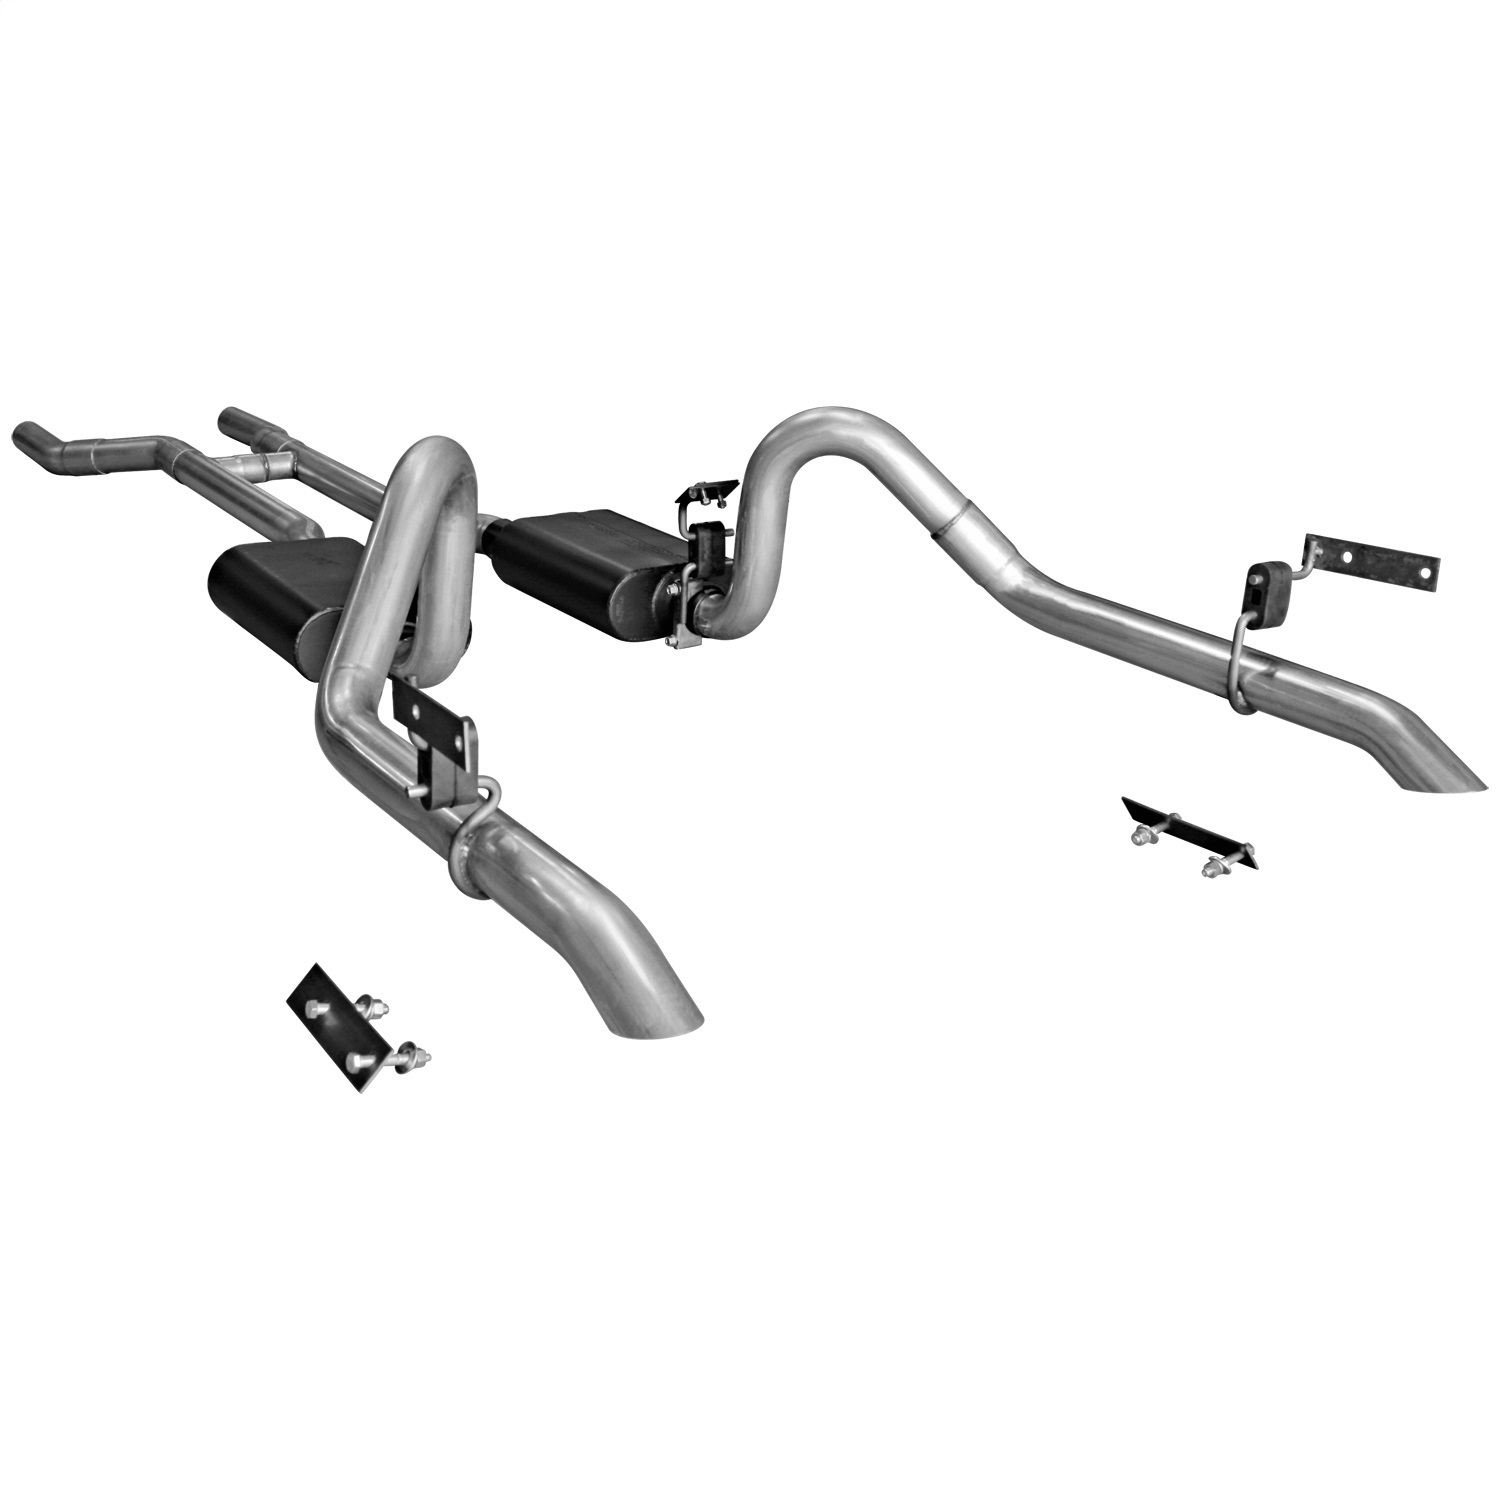 Flowmaster Flowmaster 17282 American Thunder Downpipe Back Exhaust System Fits Mustang